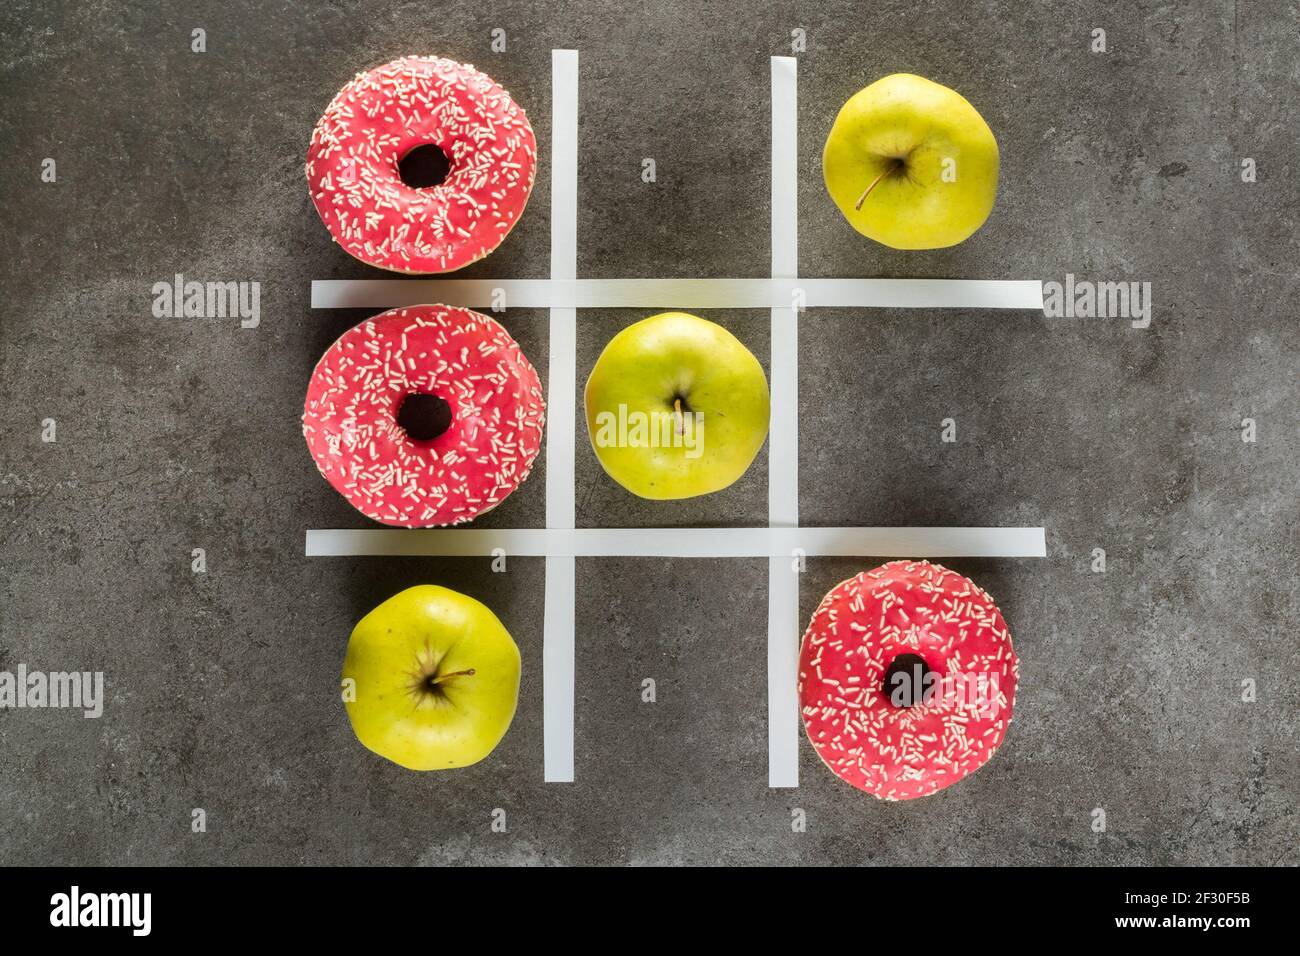 Healthy vs unhealthy food, green apples vs donuts in tic tac toe game Stock Photo